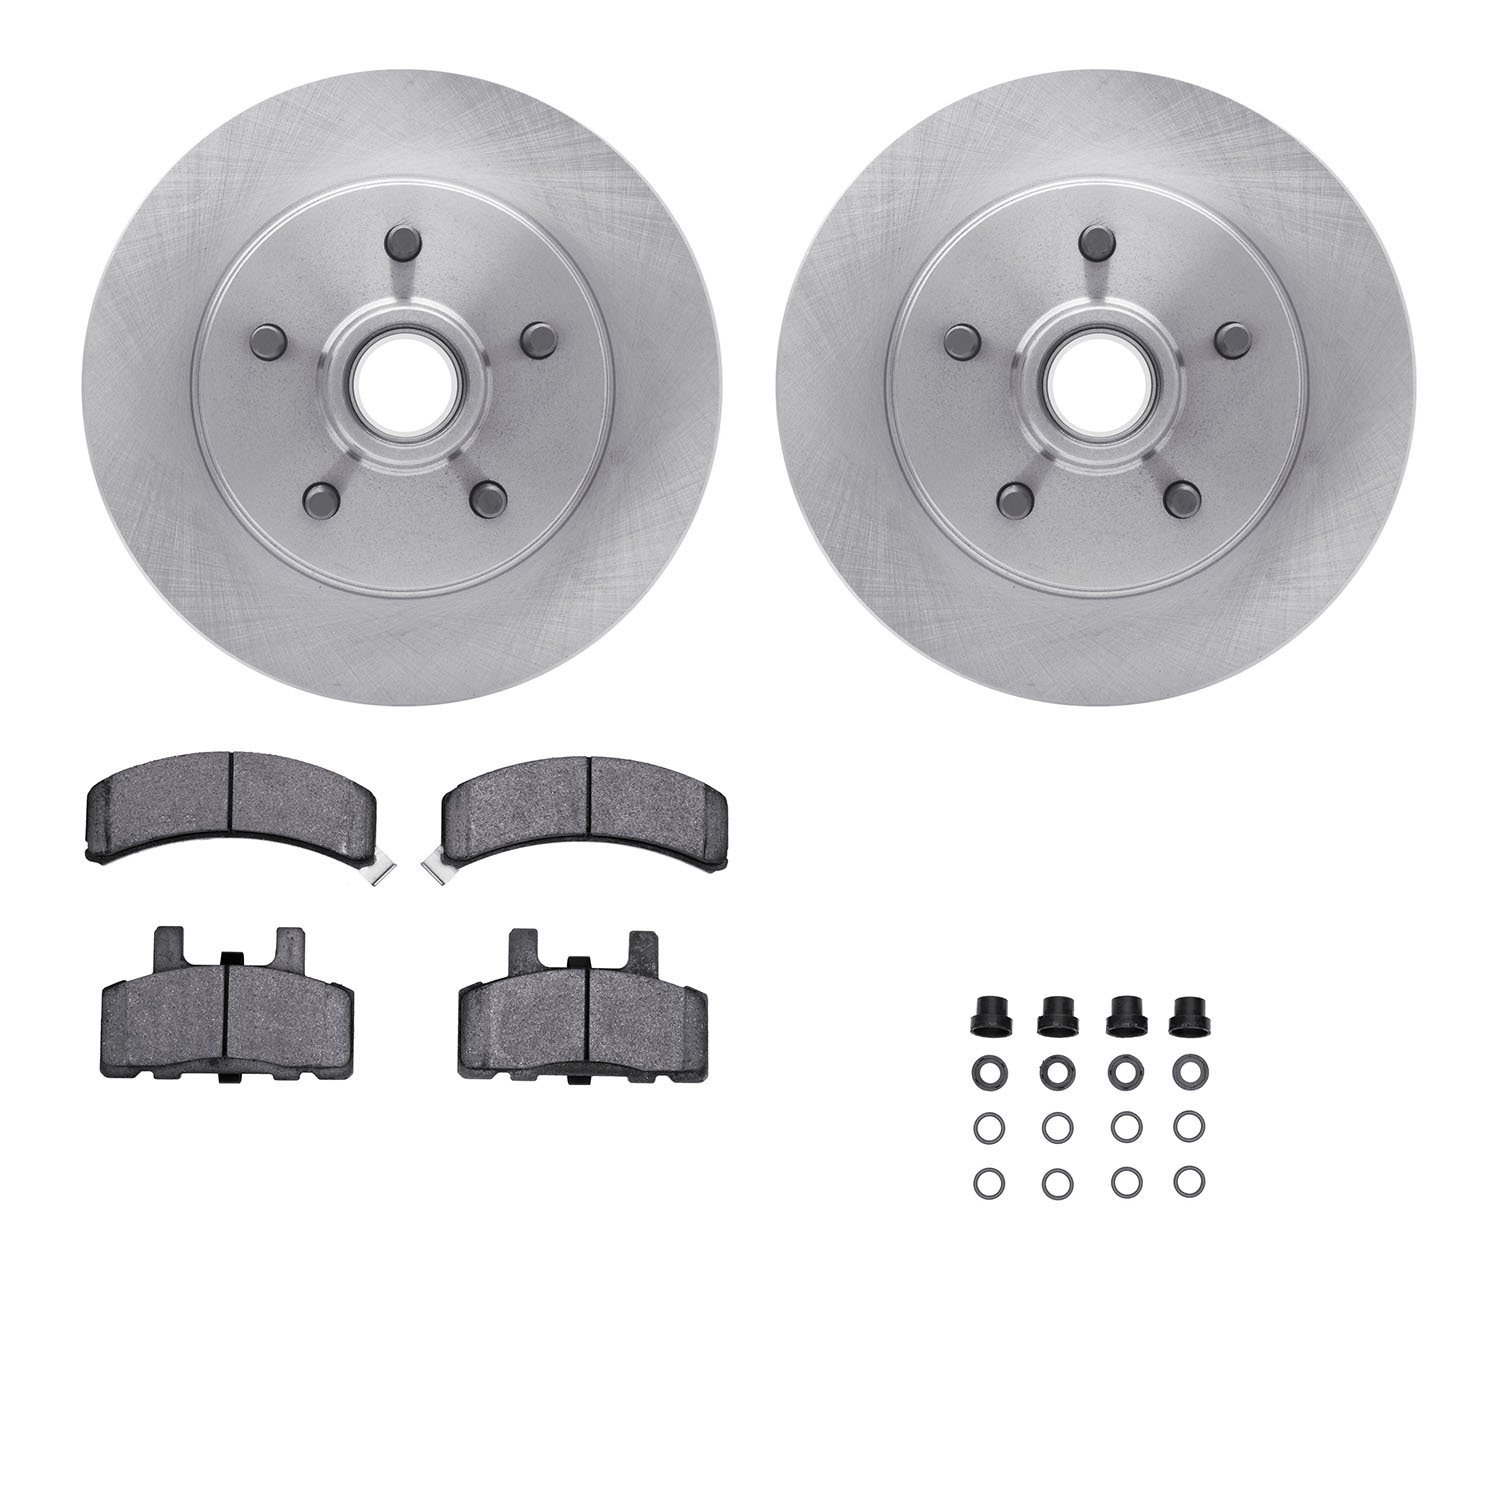 6412-48013 Brake Rotors with Ultimate-Duty Brake Pads Kit & Hardware, 1988-1994 GM, Position: Front